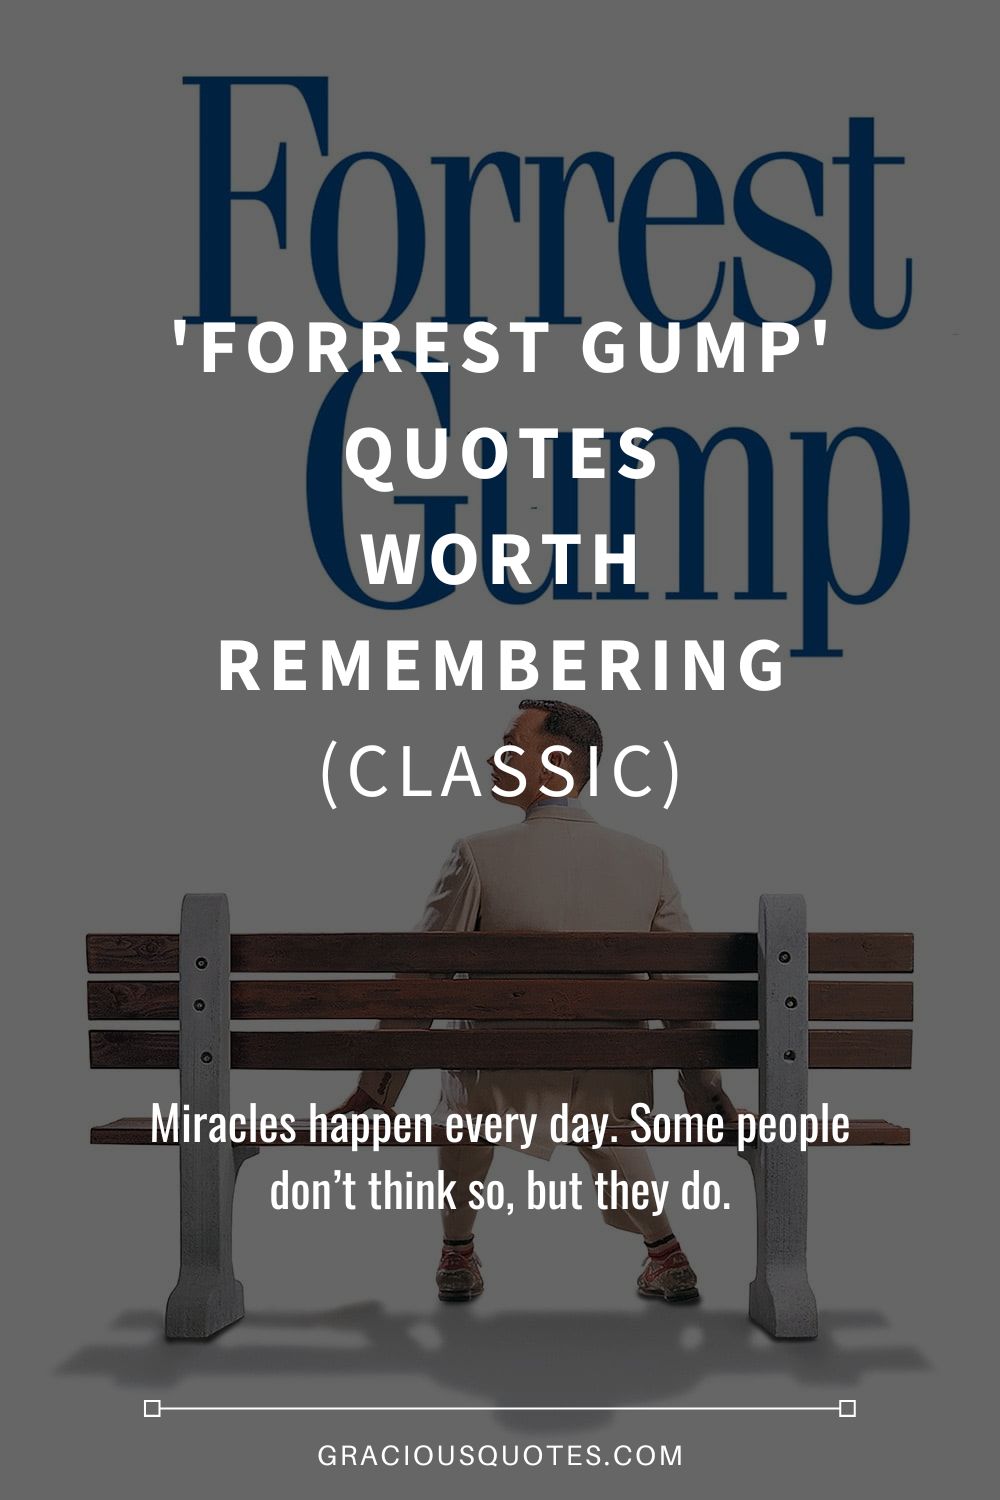 'Forrest Gump' Quotes Worth Remembering (CLASSIC) - Gracious Quotes